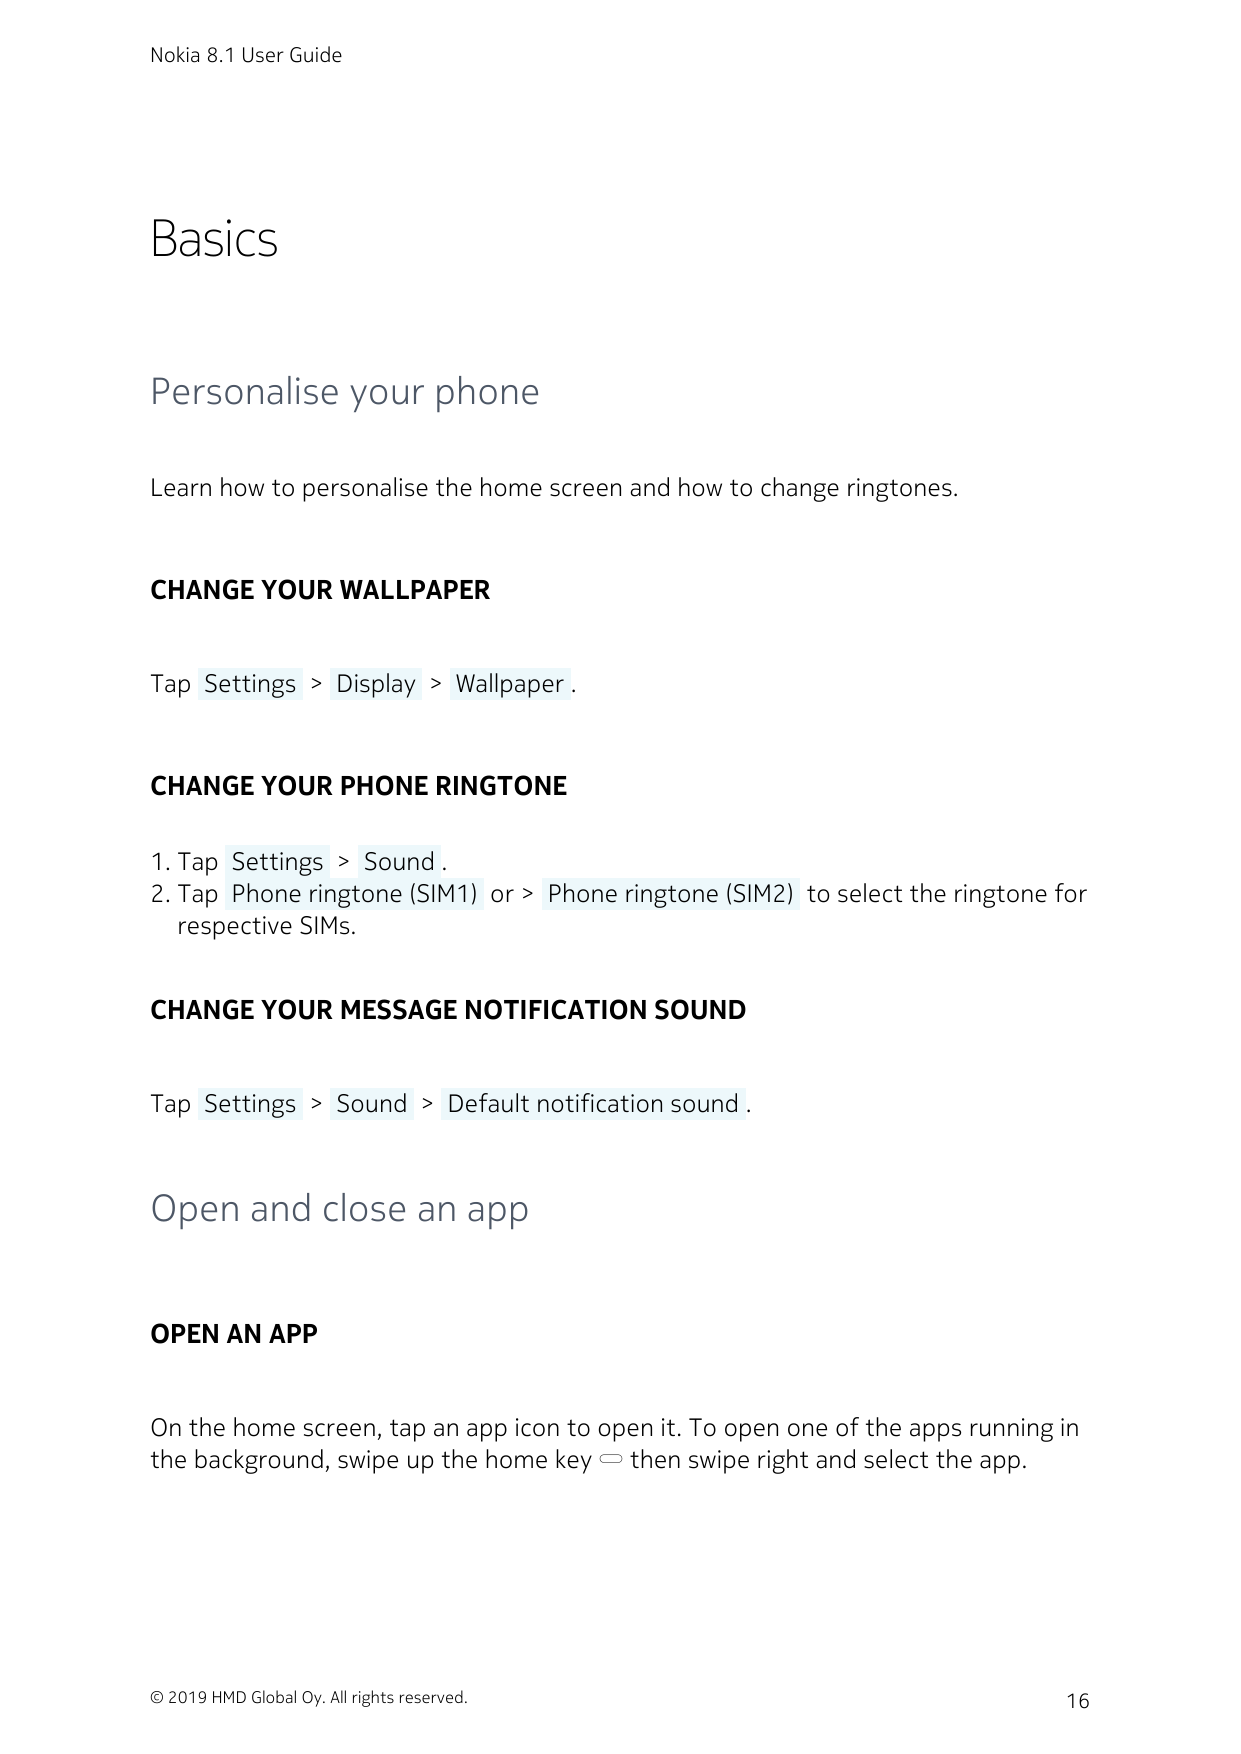 Nokia 8.1 User GuideBasicsPersonalise your phoneLearn how to personalise the home screen and how to change ringtones.CHANGE YOUR